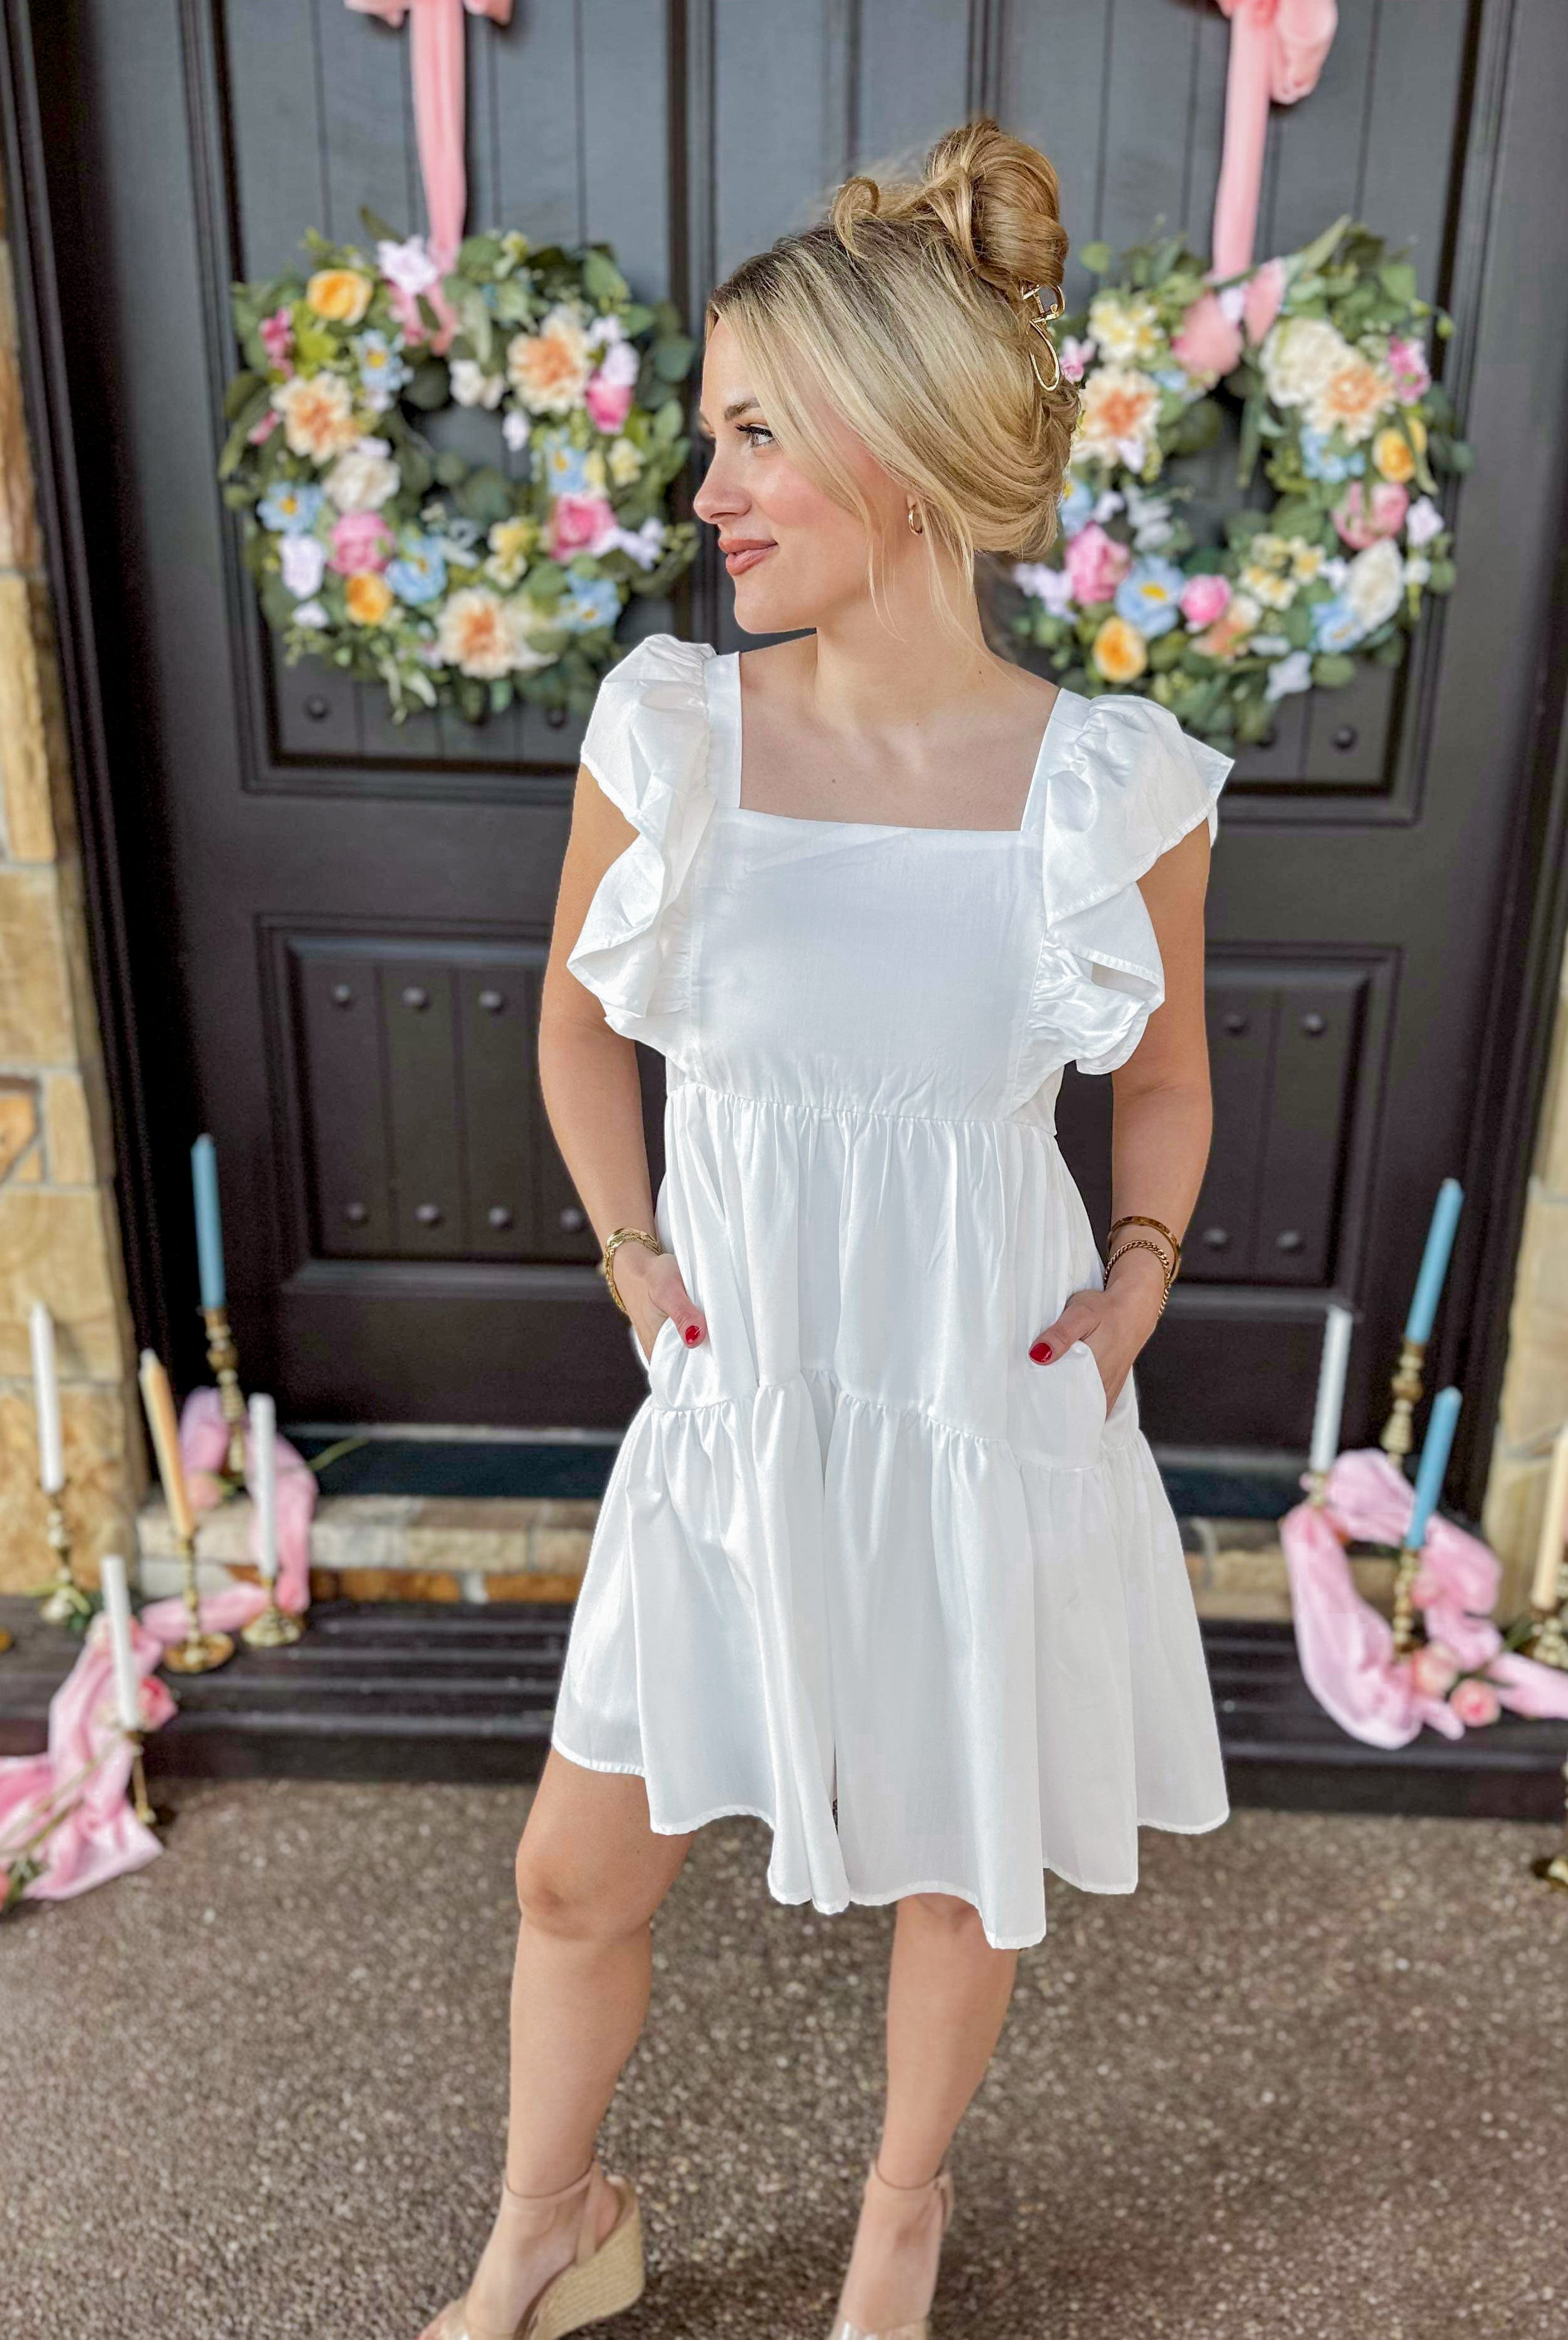 Genevieve Square Neck Ruffle Sleeve Babydoll Dress - Be You Boutique